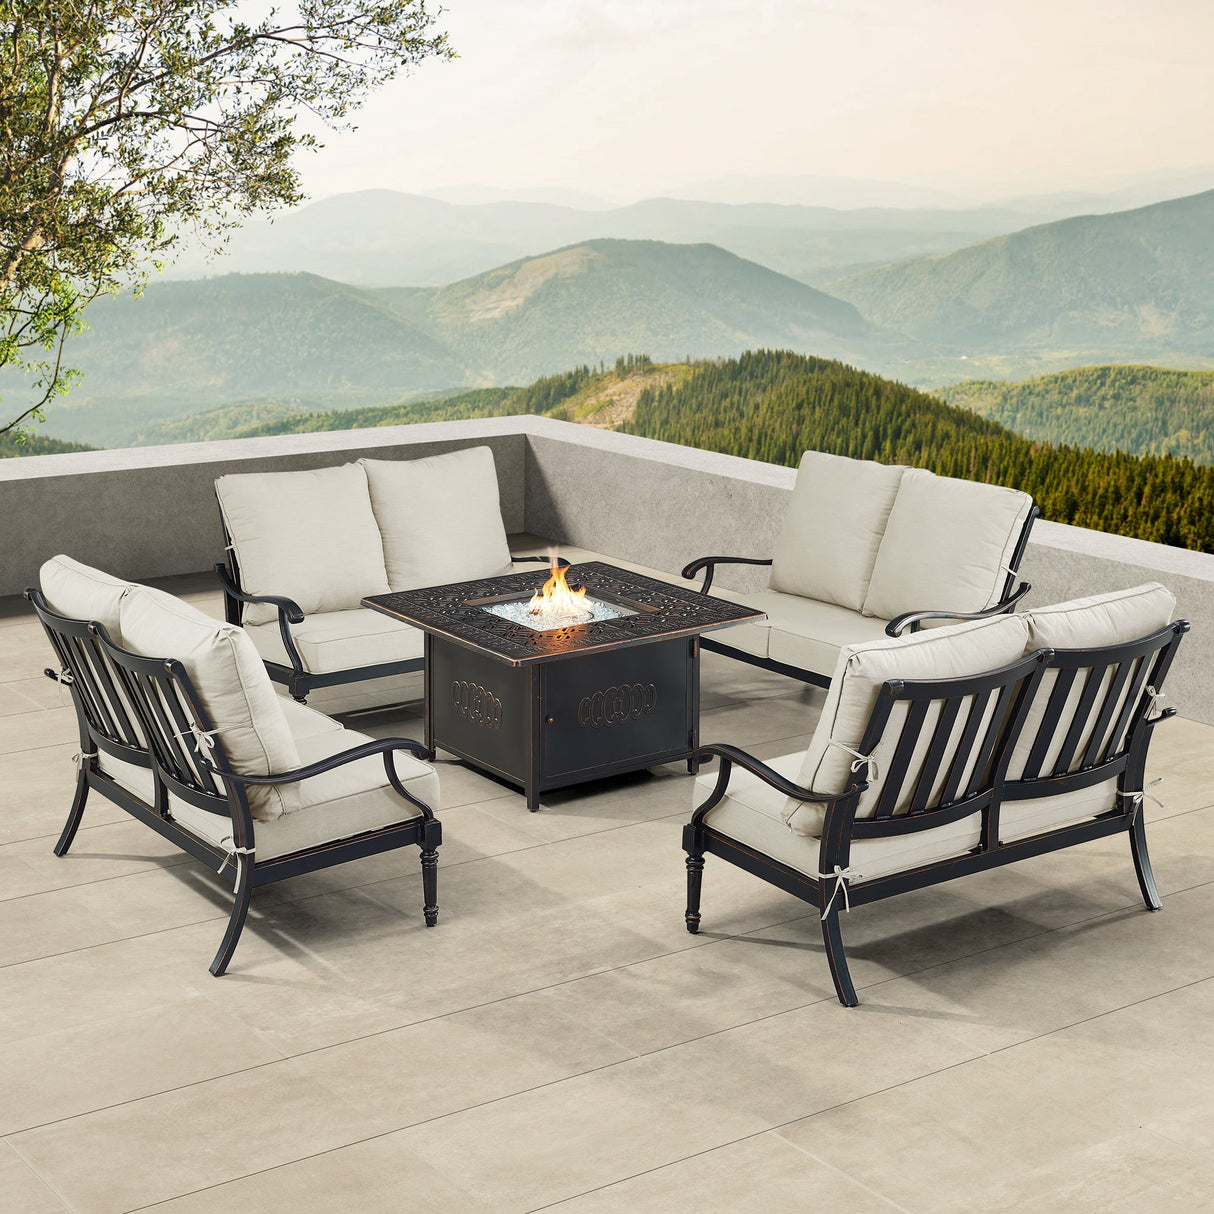 Black Aluminum Fire Table Set with Four Deep Seating Loveseats